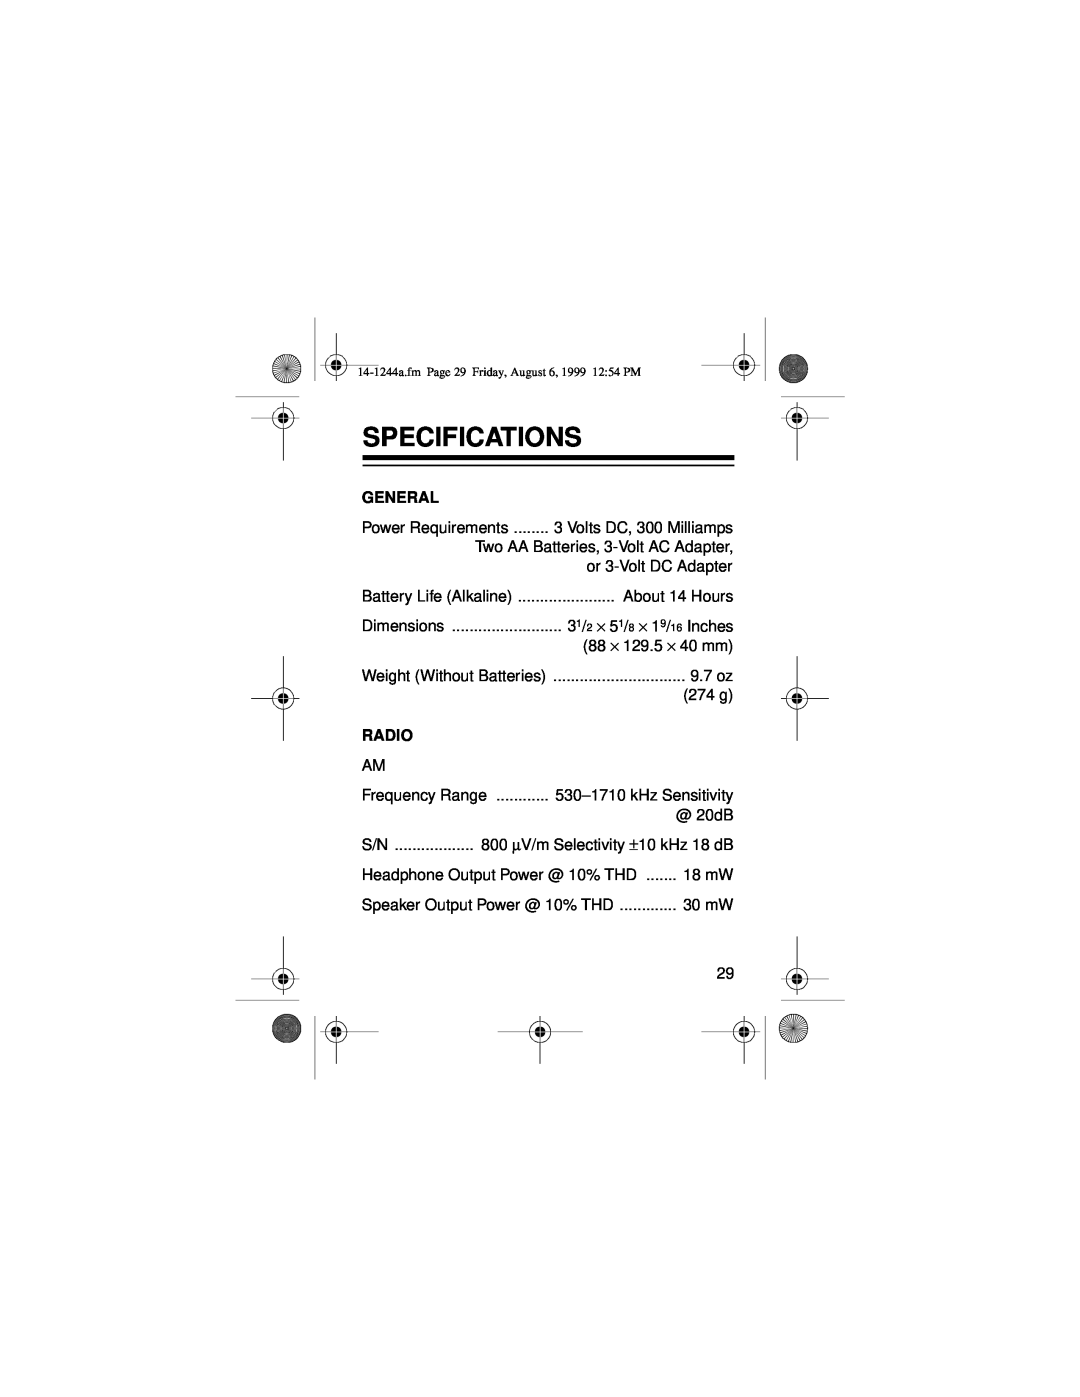 Optimus SCP-97 owner manual Specifications, General, Radio 